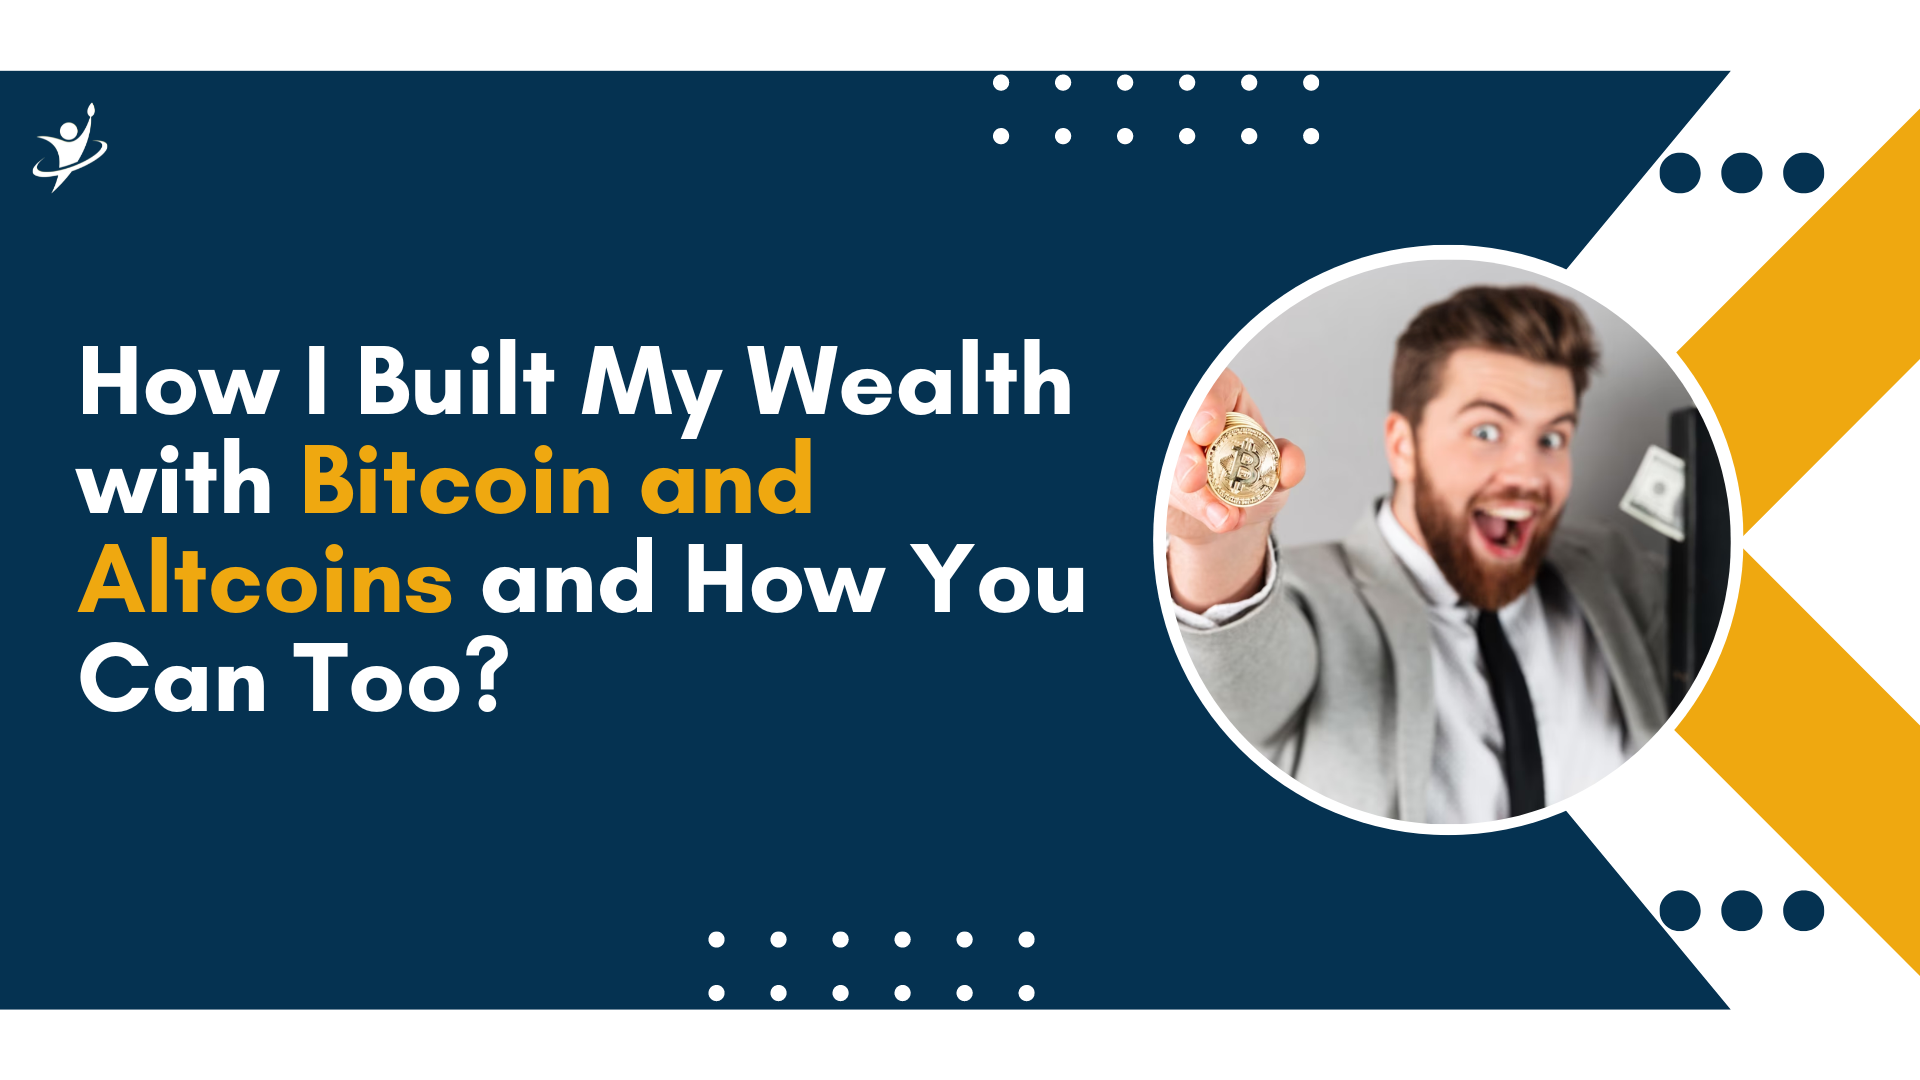 Built My Wealth with Bitcoin and Altcoins